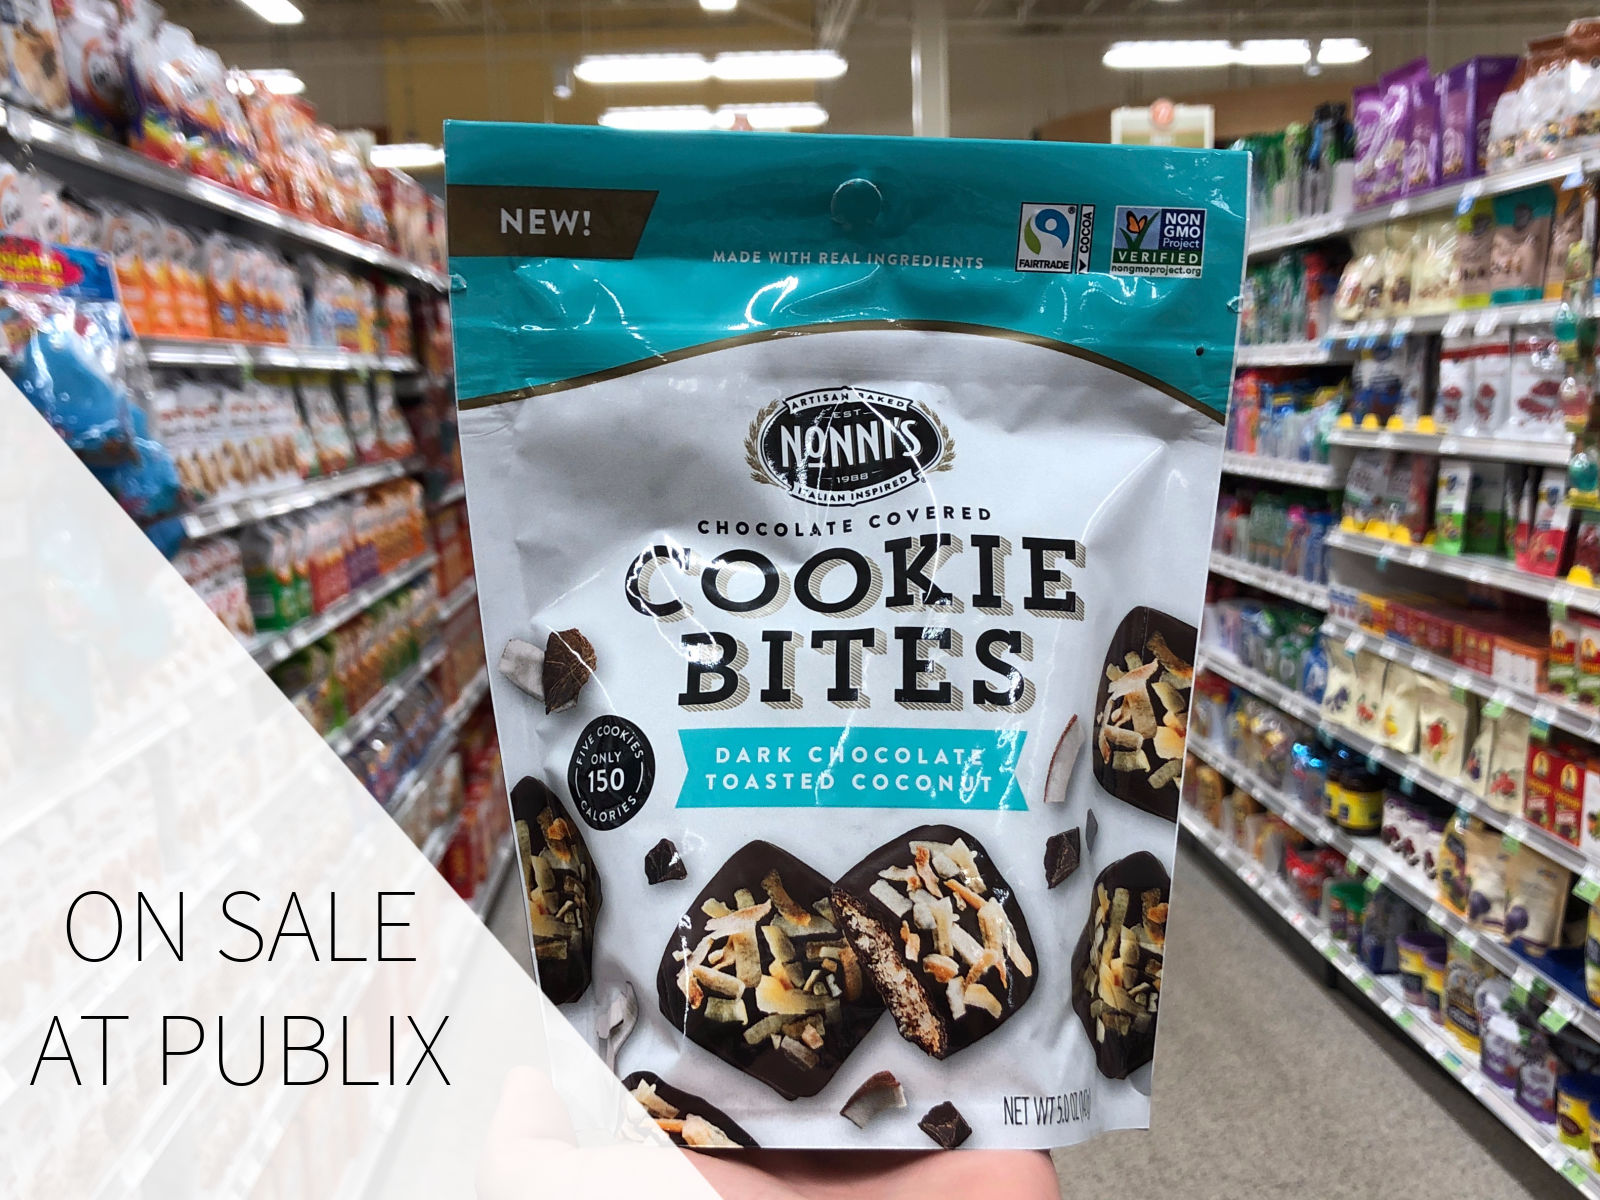 Try NEW Nonni’s Chocolate Covered Cookie Bites - Save Now At Publix on I Heart Publix 1